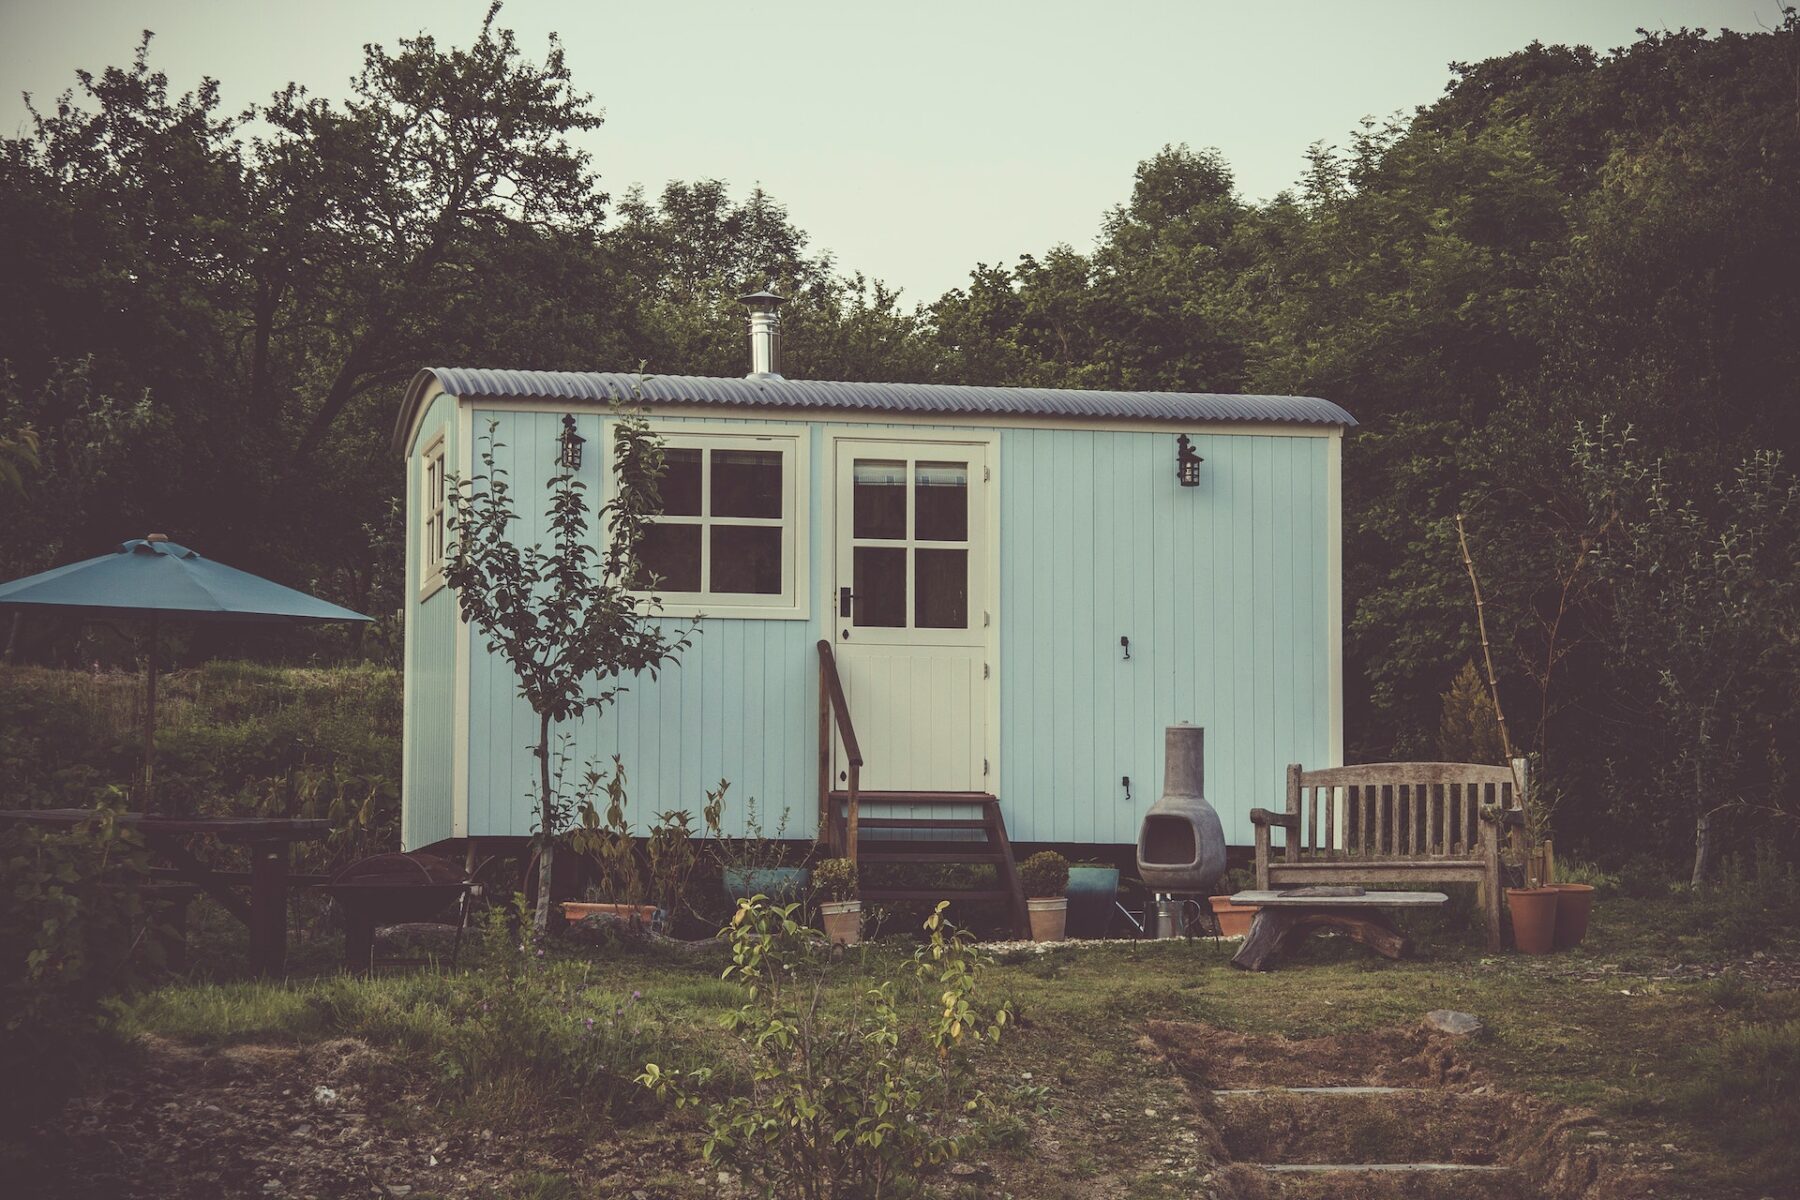 The North Carolina Tiny Home Experience: A Journey to Simpler, Happier Living